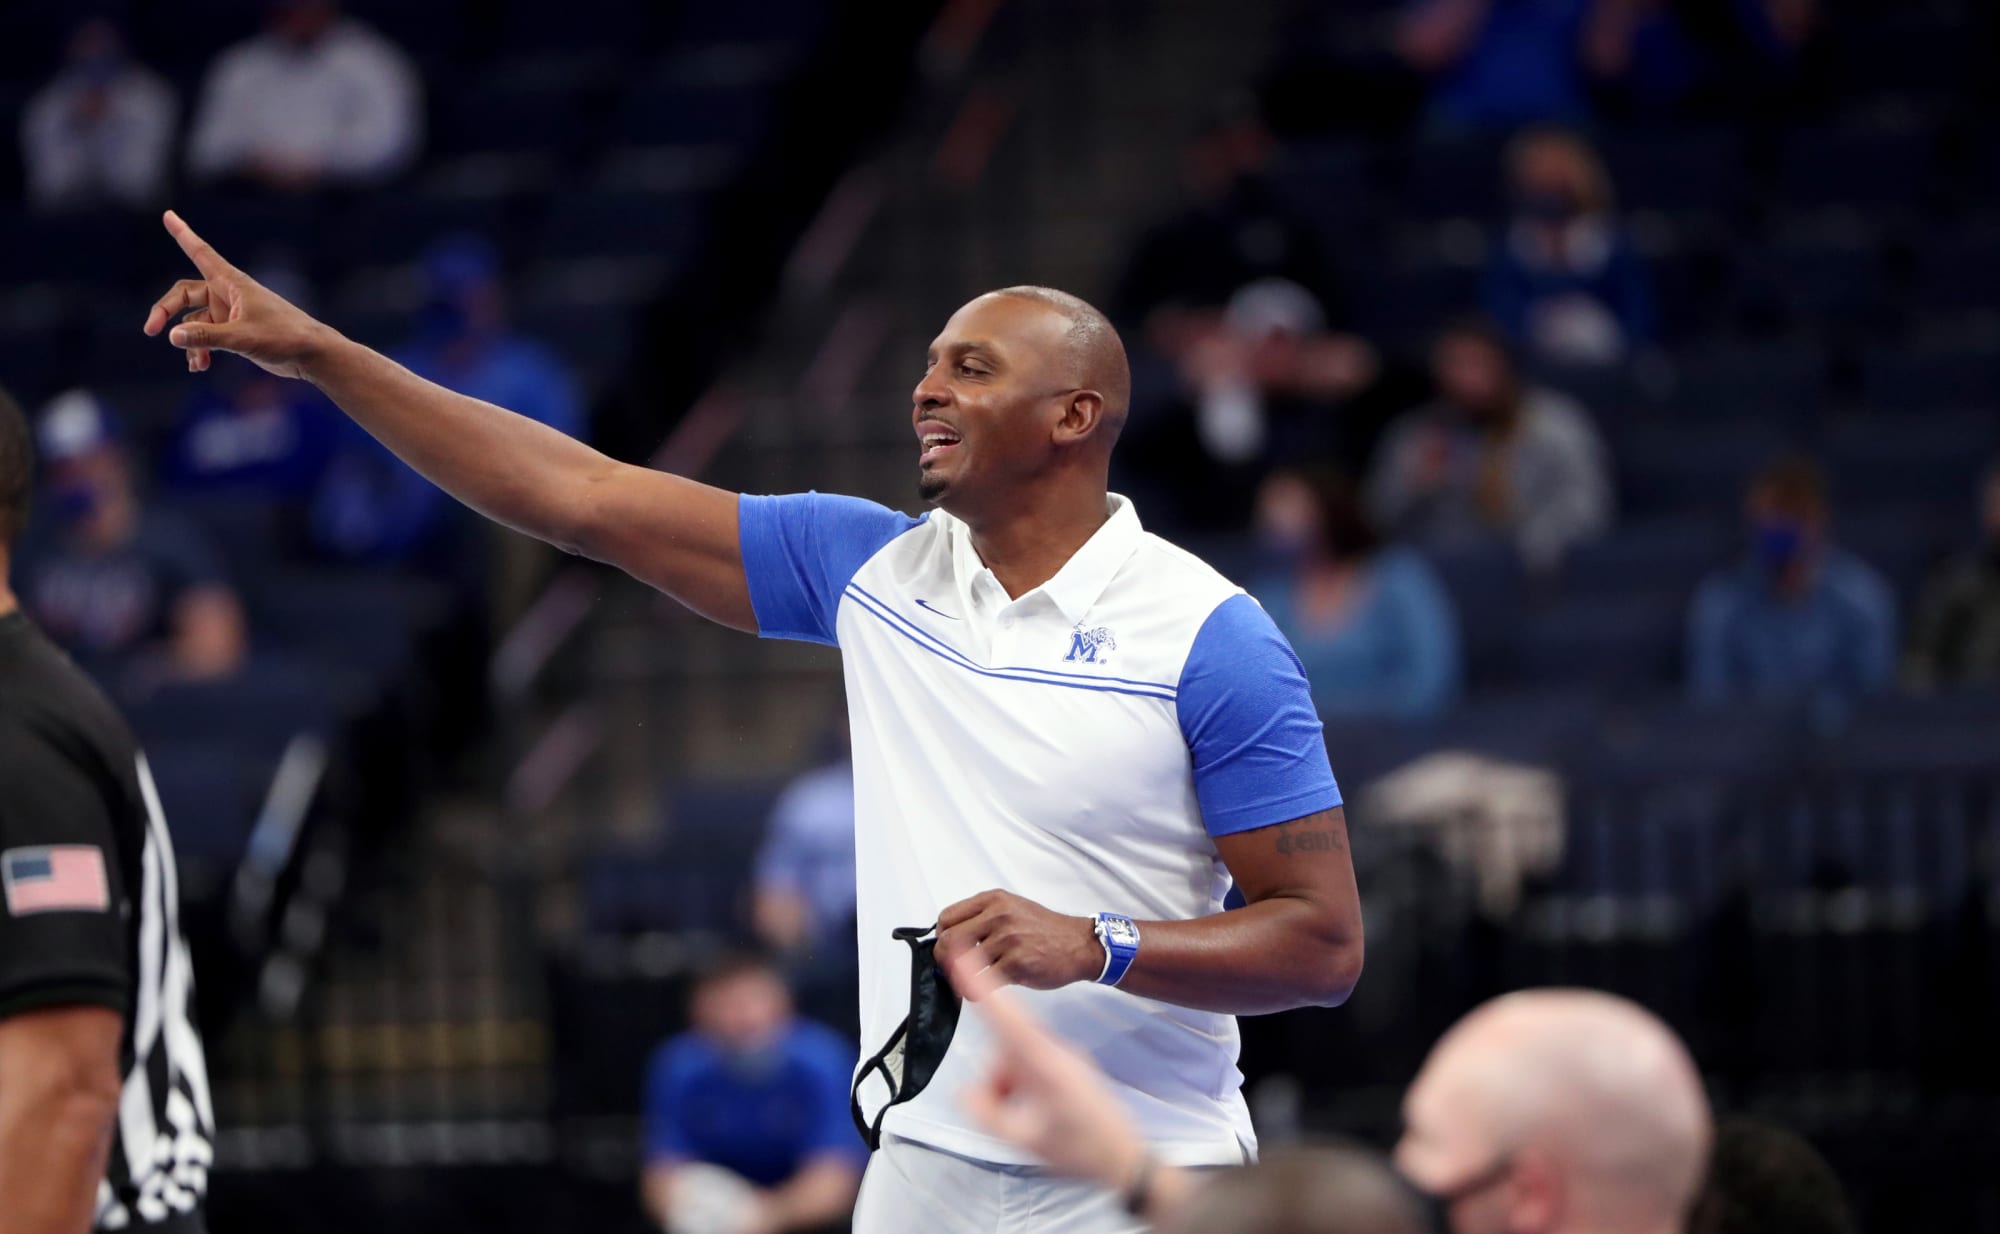 NCAA suspends Memphis Tigers coach Penny Hardaway for three games